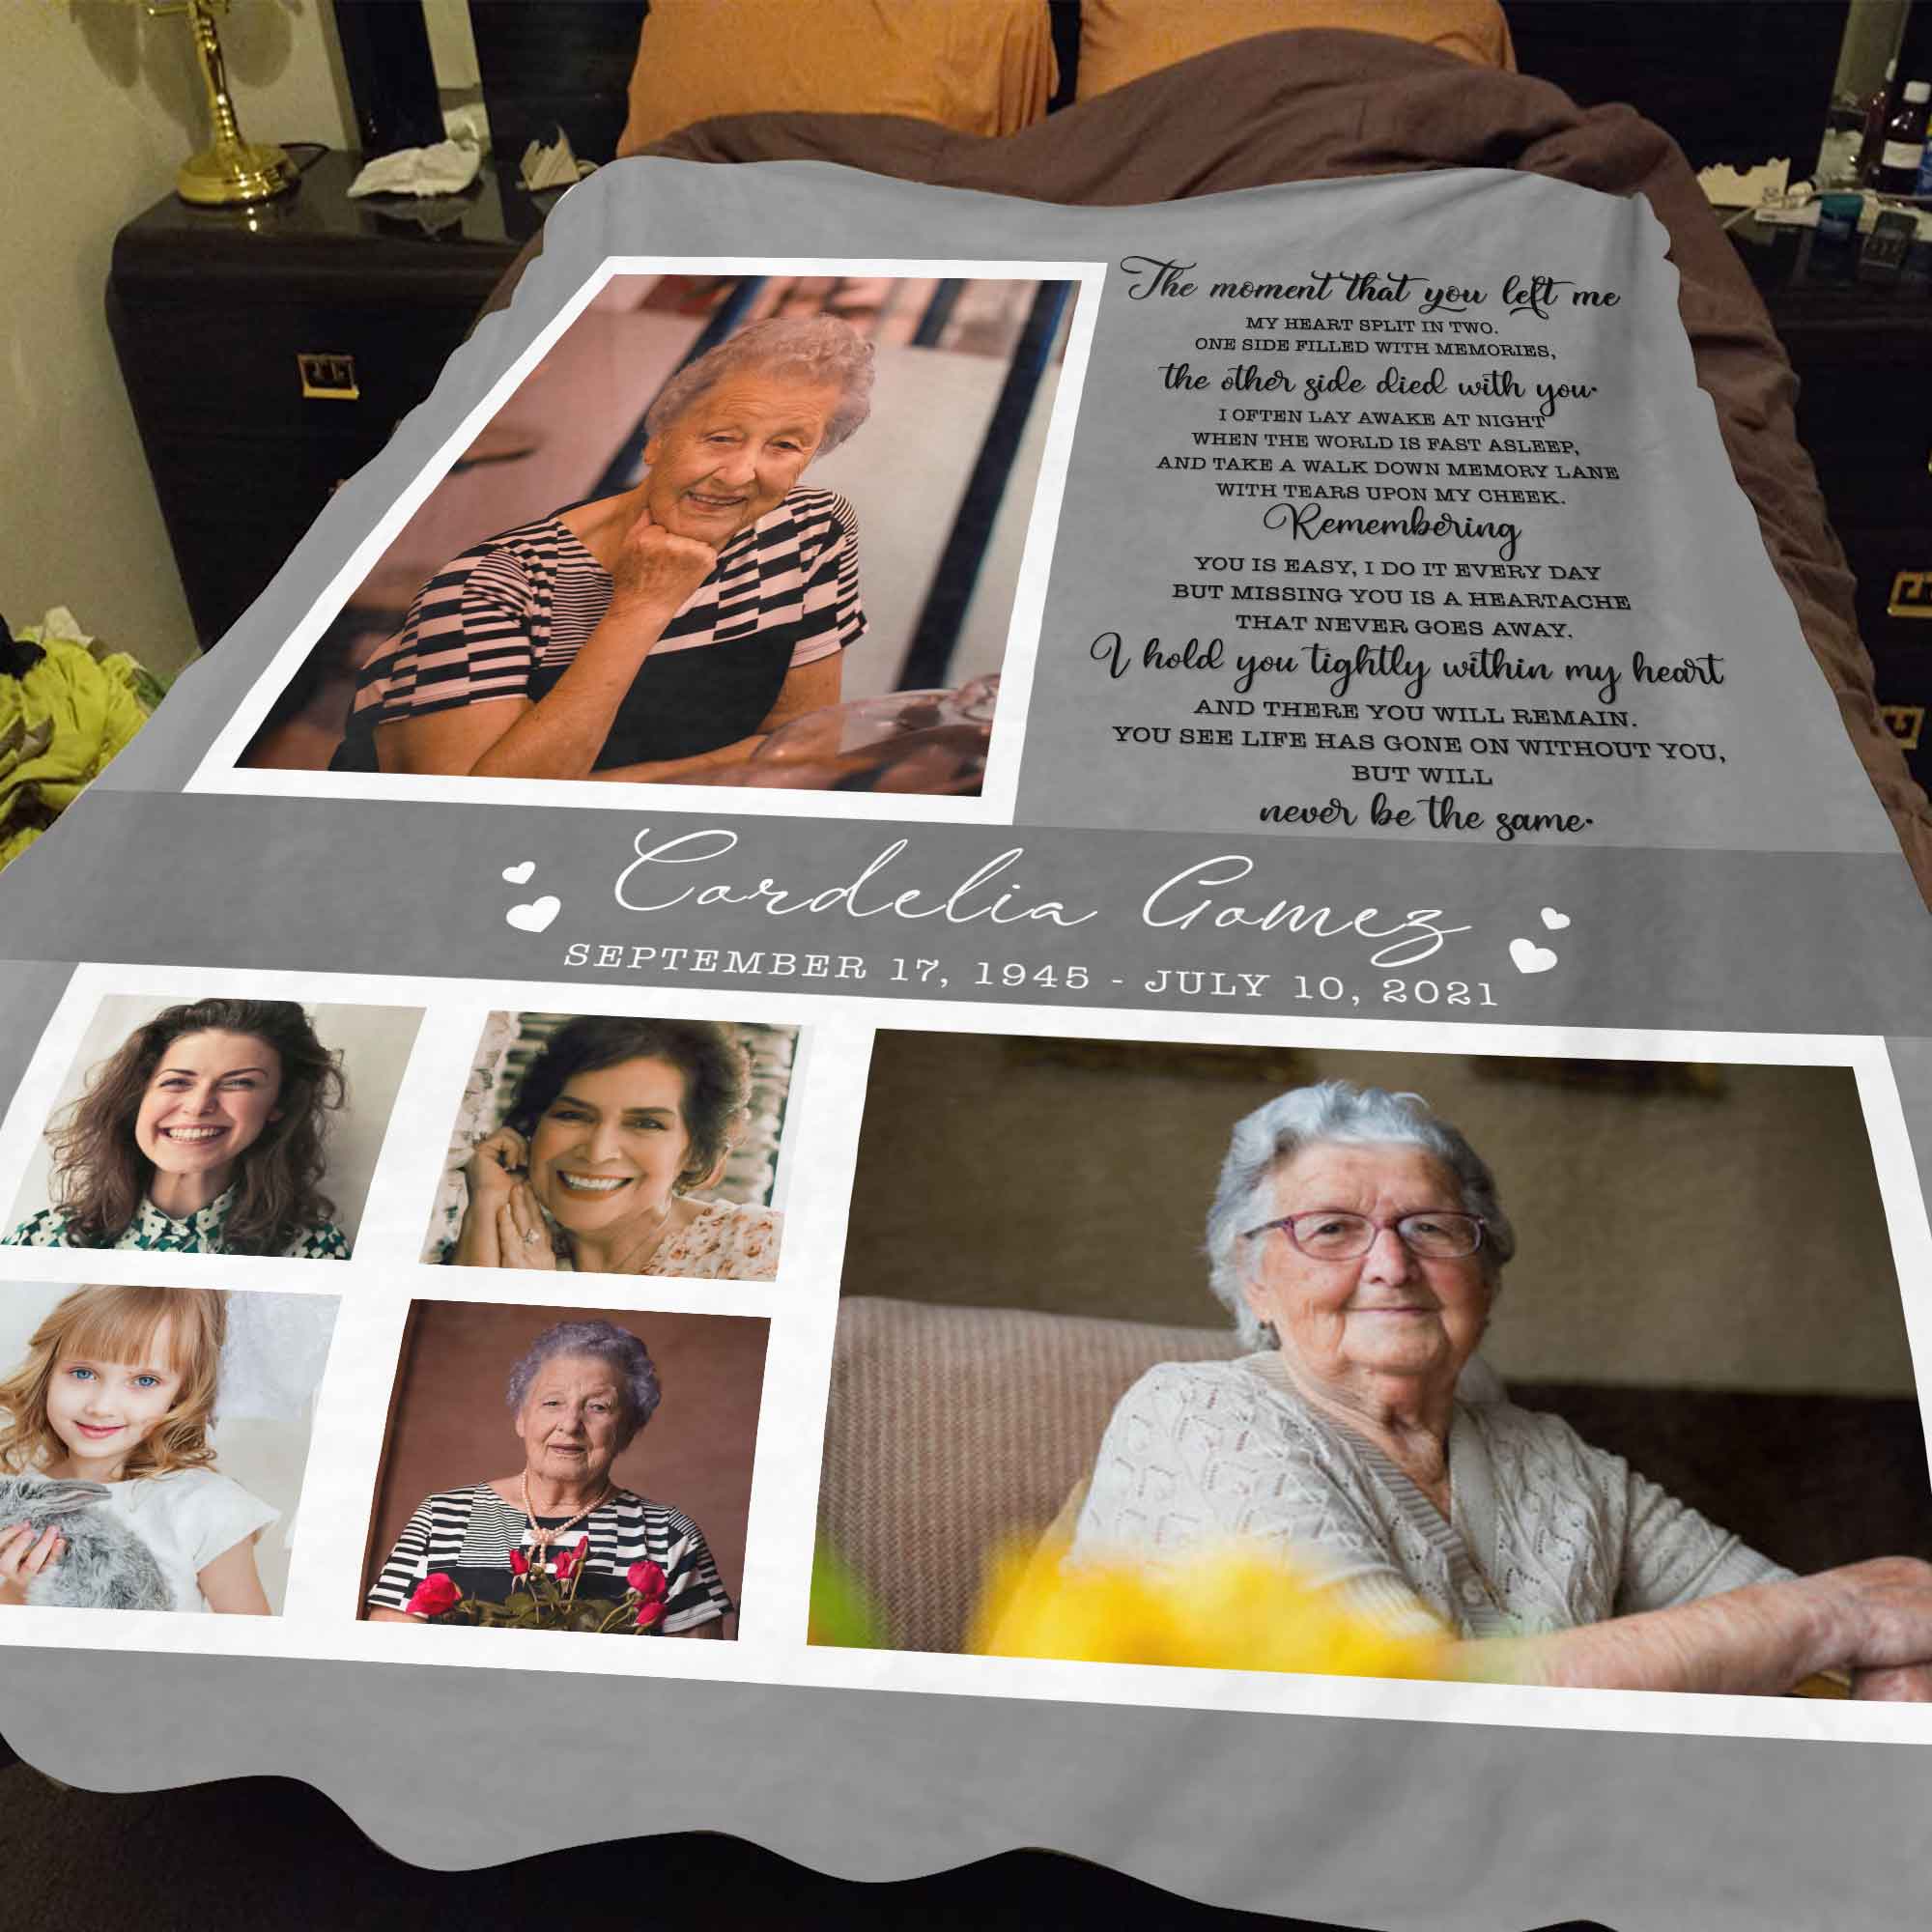 Loss Of Mother Memorial Blankets Personalized, The Moment That You Left Me Custom Photo Blanket